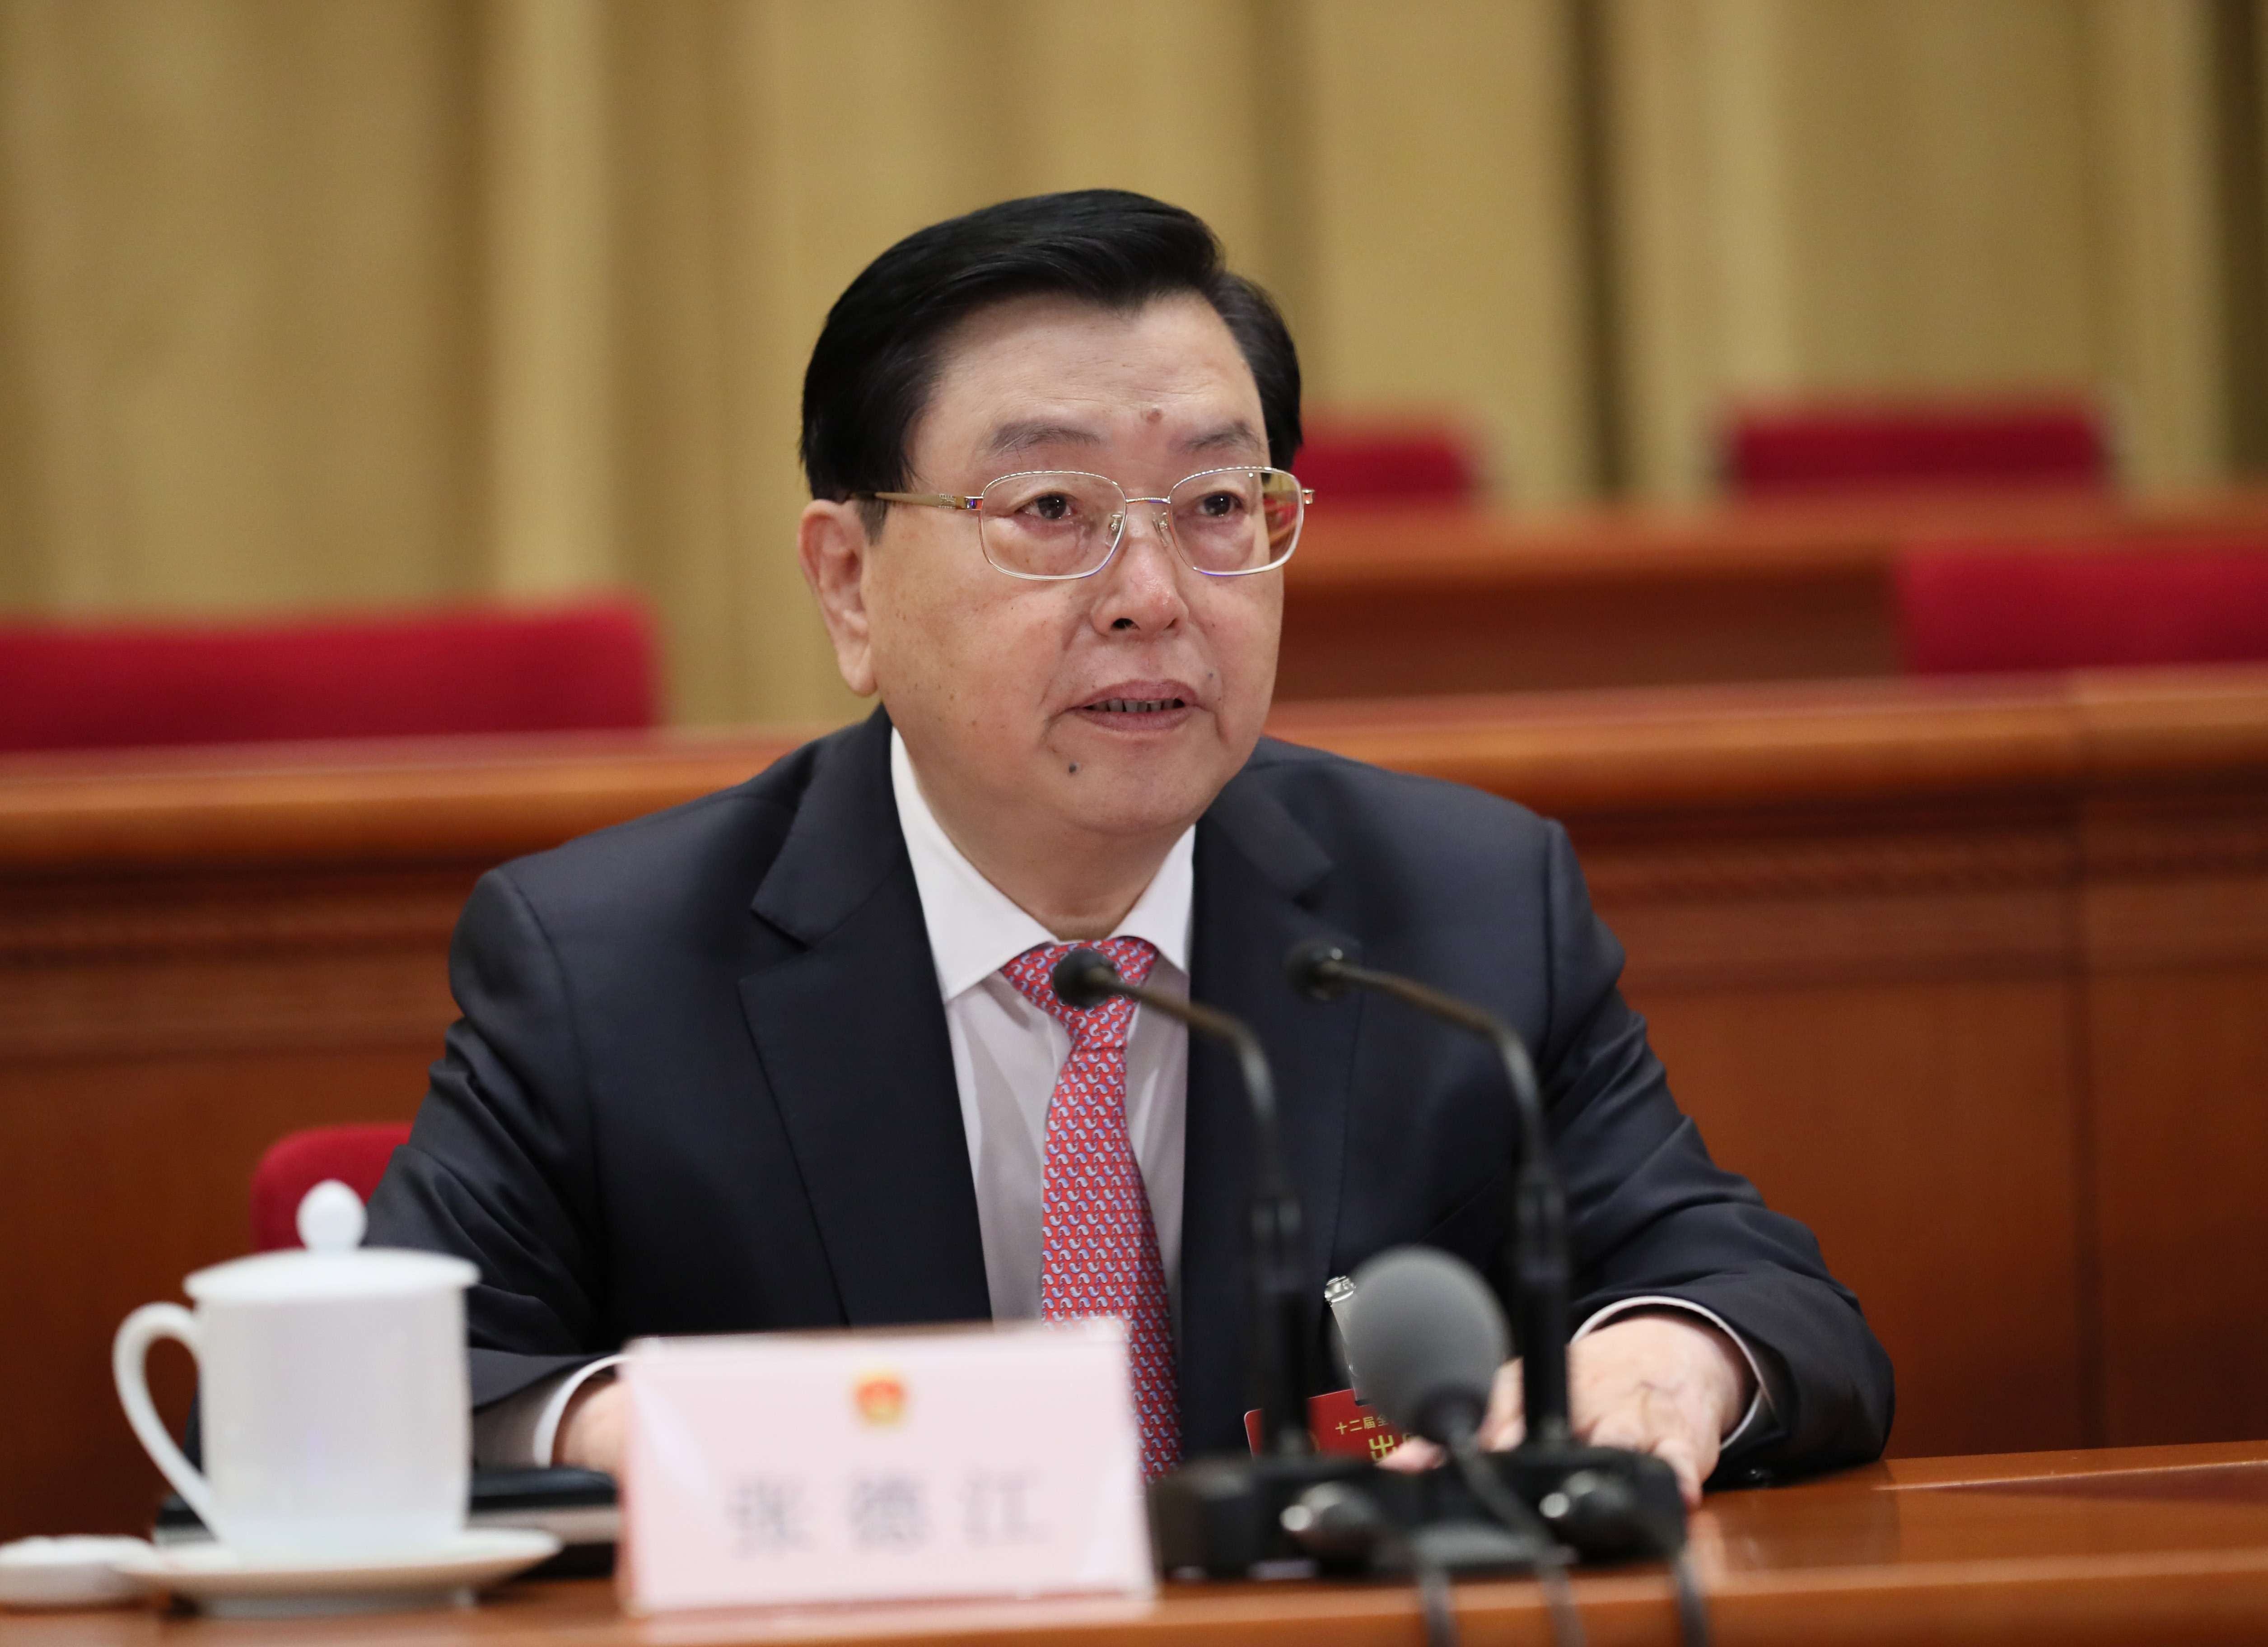 Zhang Dejiang, chairman of the Standing Committee of the National People's Congress, presides over a meeting at the Great Hall of the People. Photo: Xinhua